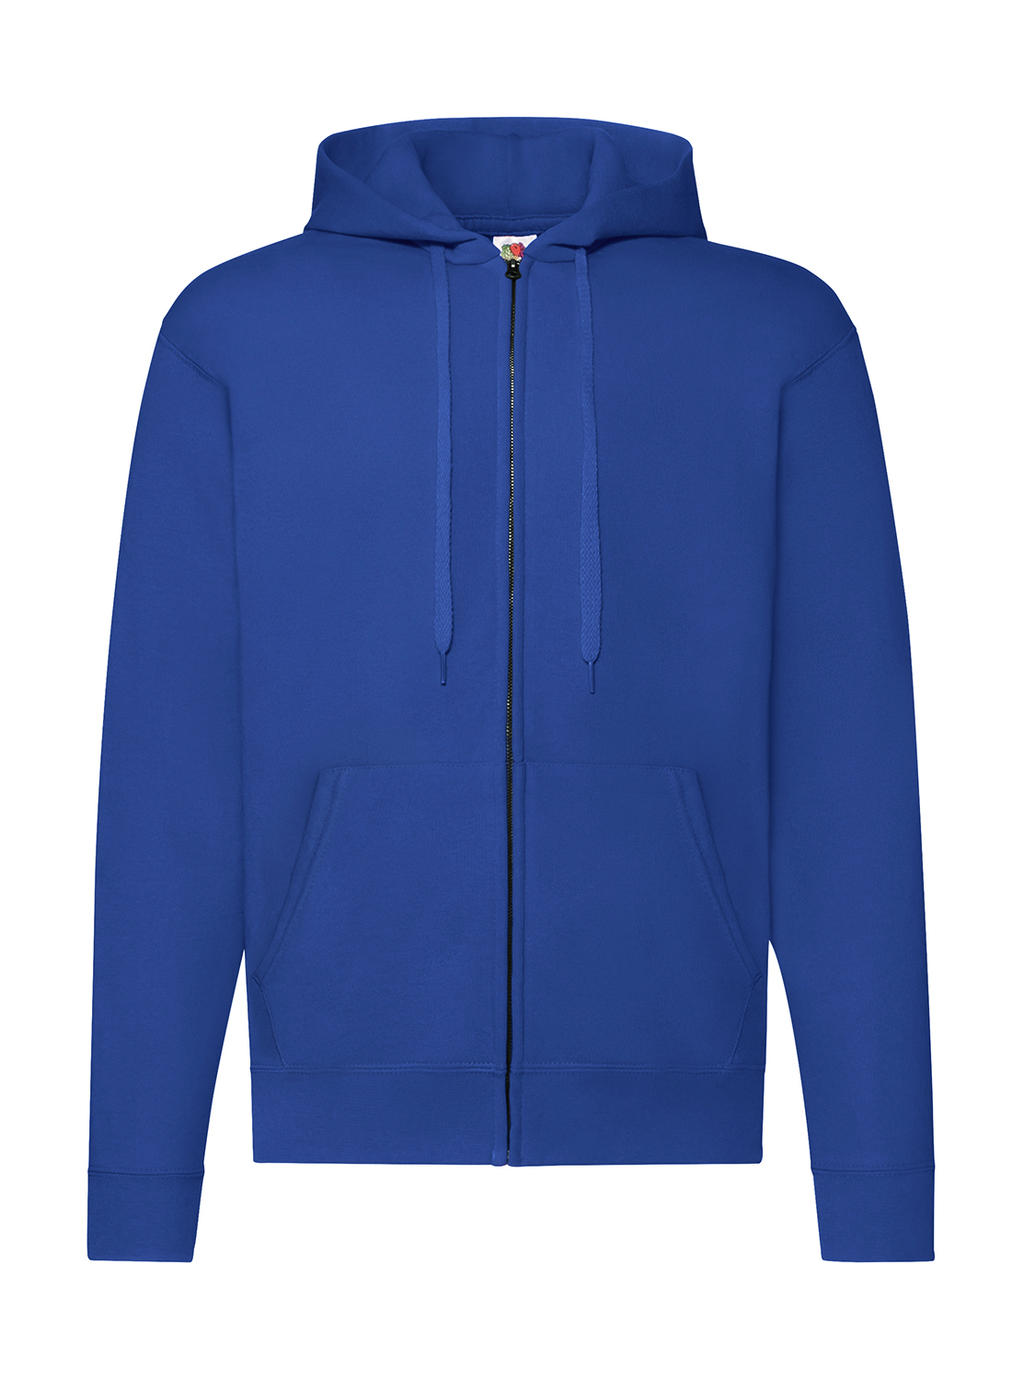  Classic Hooded Sweat Jacket in Farbe Royal Blue